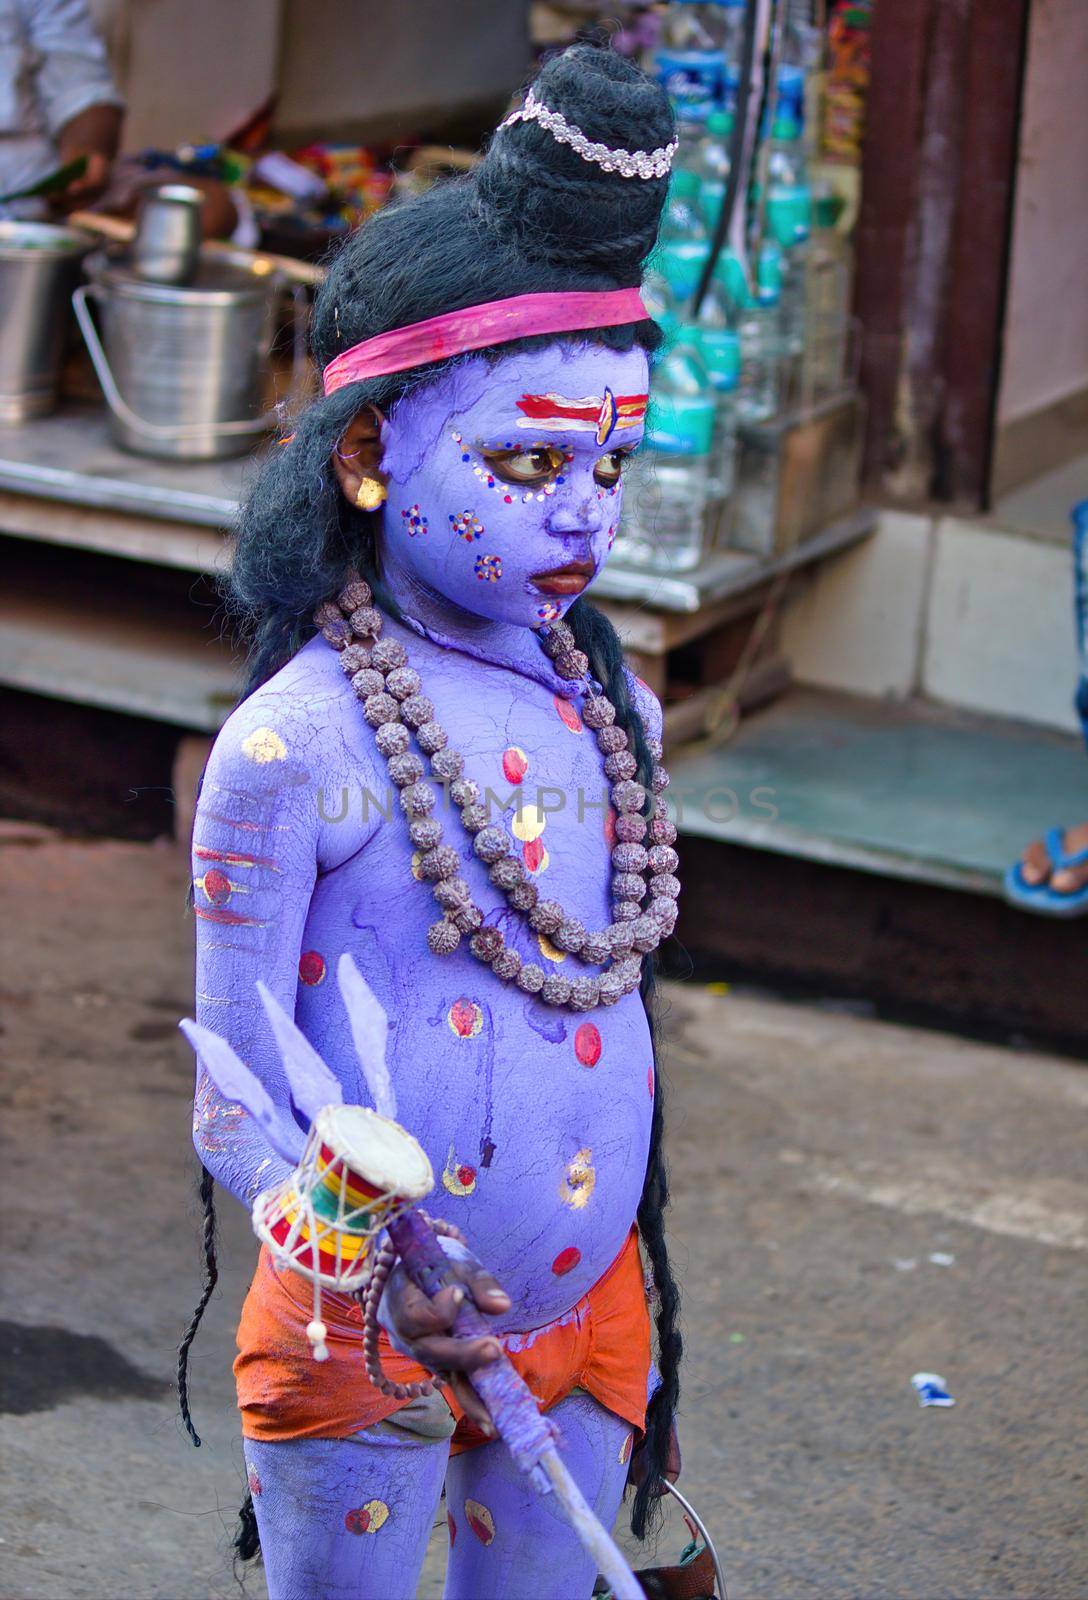 Pushkar, India - NOVEMBER 10, 2016: An unidentified boy dressed and disguised as hindu Lord Shiva with blue paint attends the Pushkar cattle fair in the state of Rajasthan by arpanbhatia